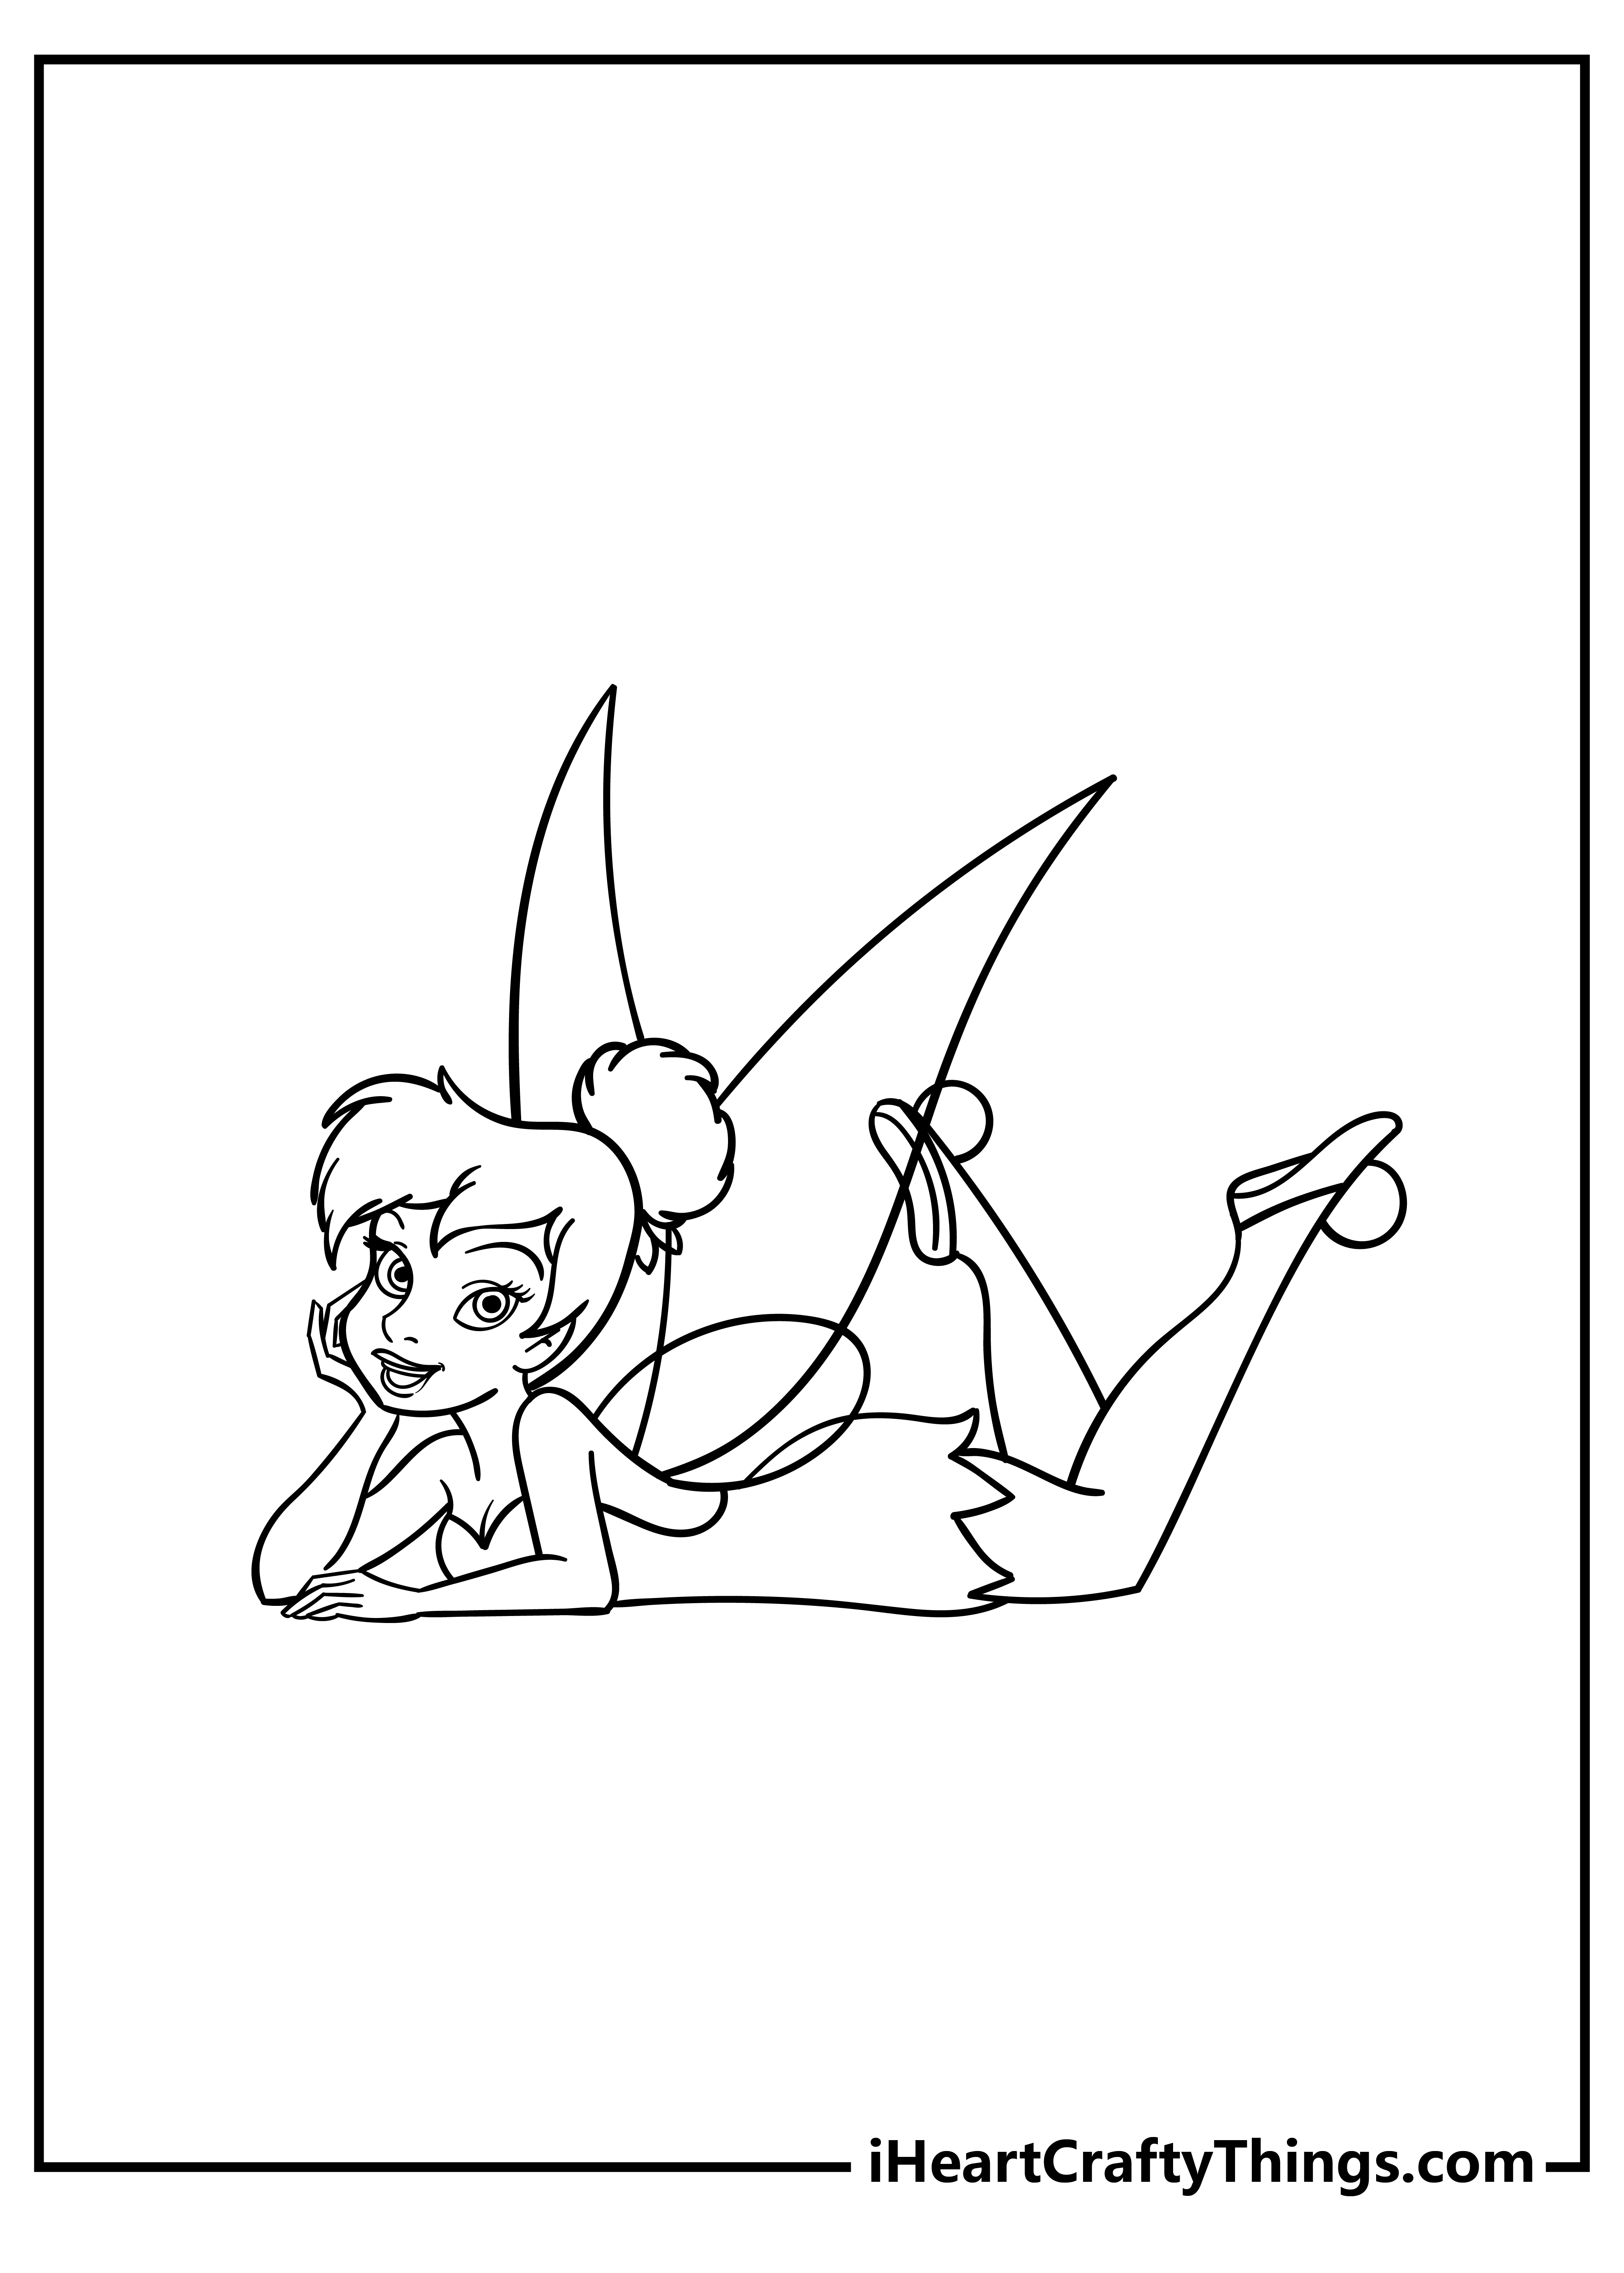 Tinkerbell Coloring Pages for kids free download